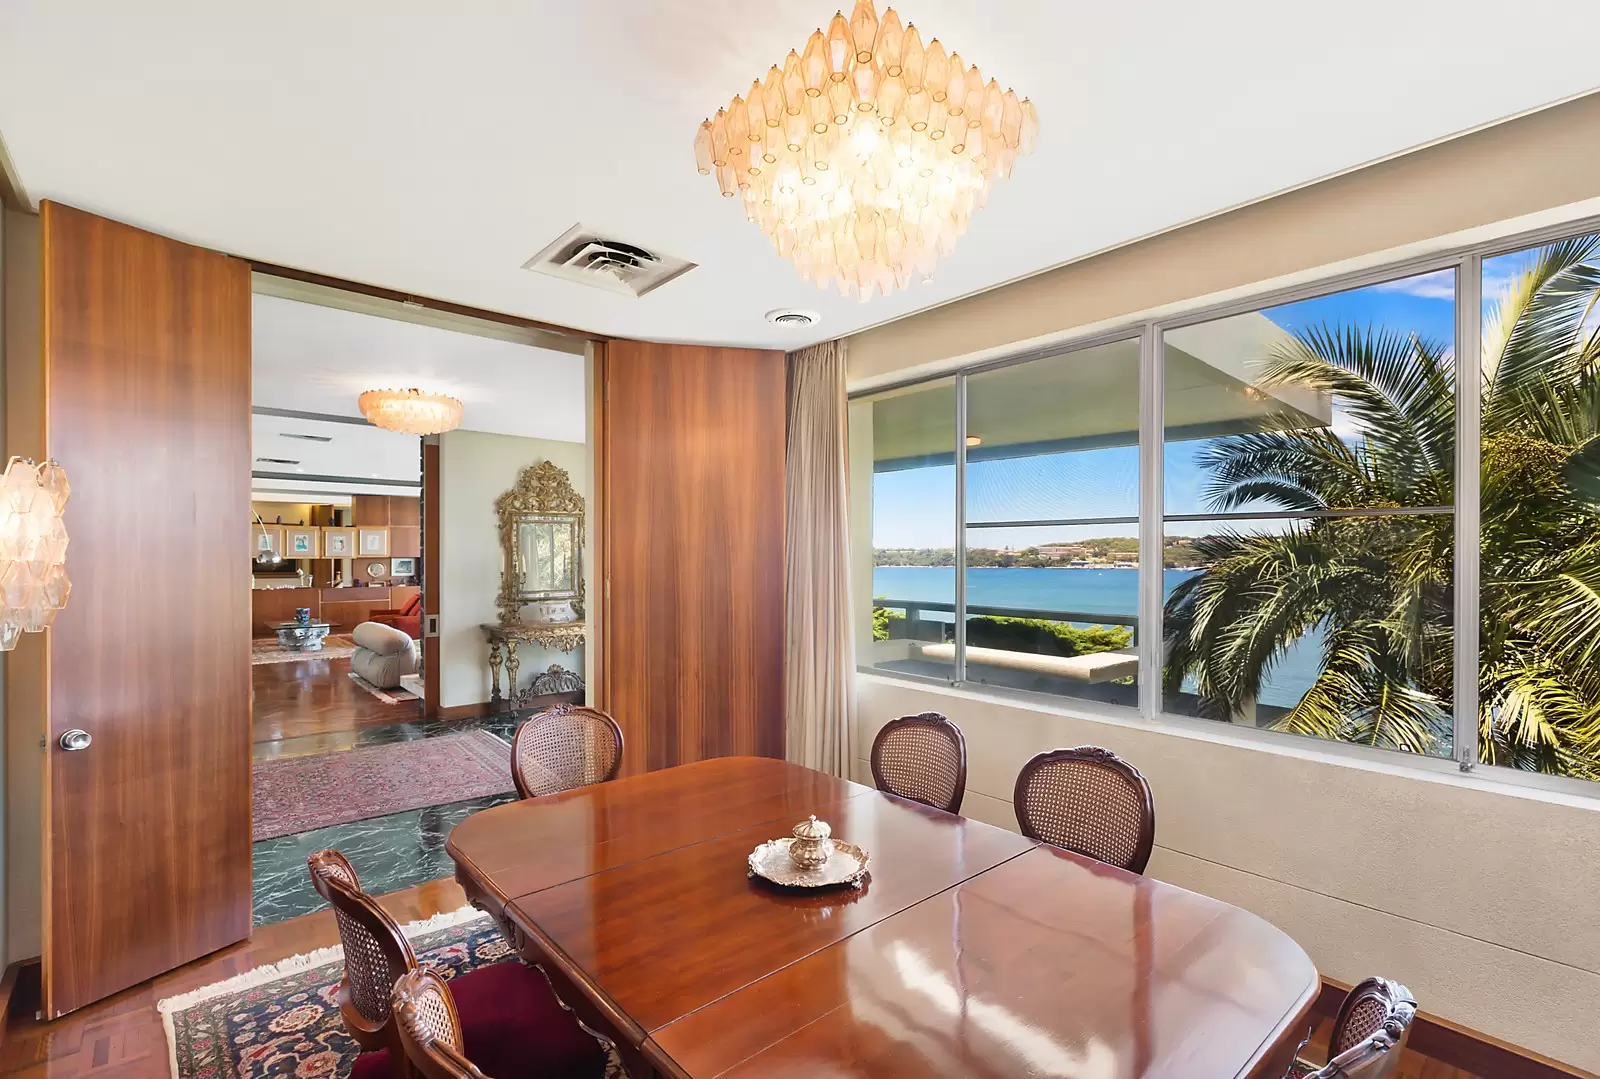 Photo #8: 1-3 Amiens Road, Clontarf - Sold by Sydney Sotheby's International Realty